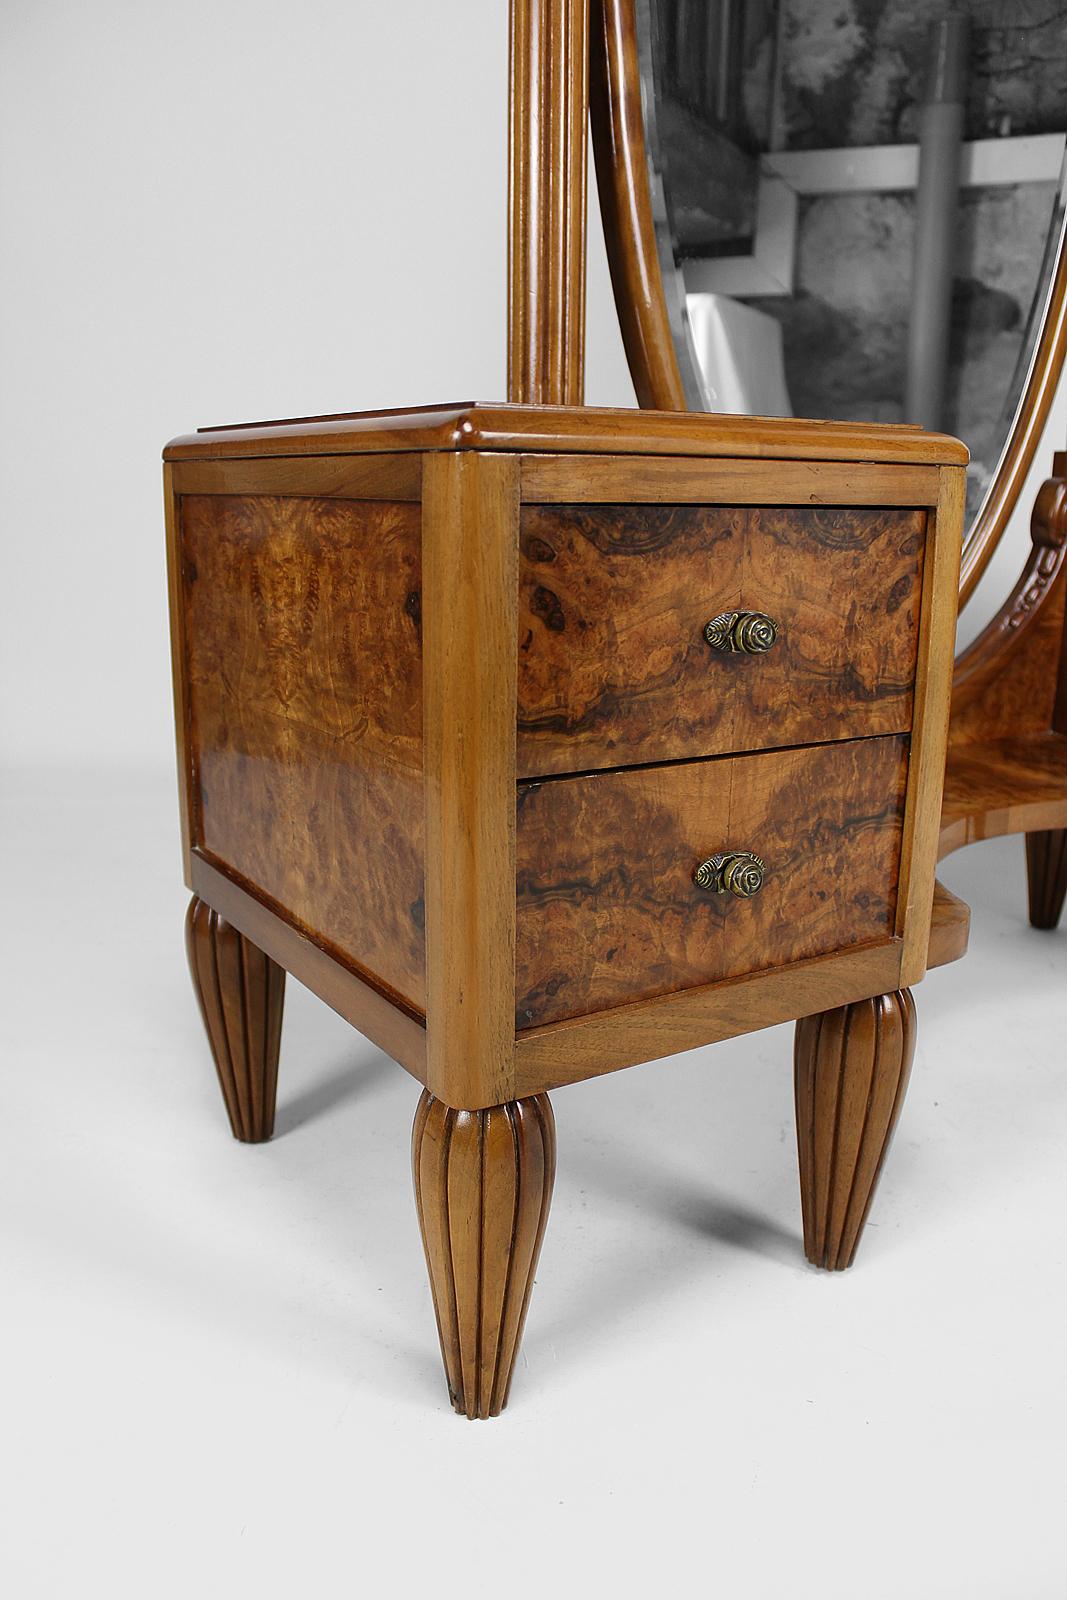 Art Deco Psyche Dressing Table and Pouf by Ateliers Gauthier-Poinsignon, c. 1920 For Sale 5